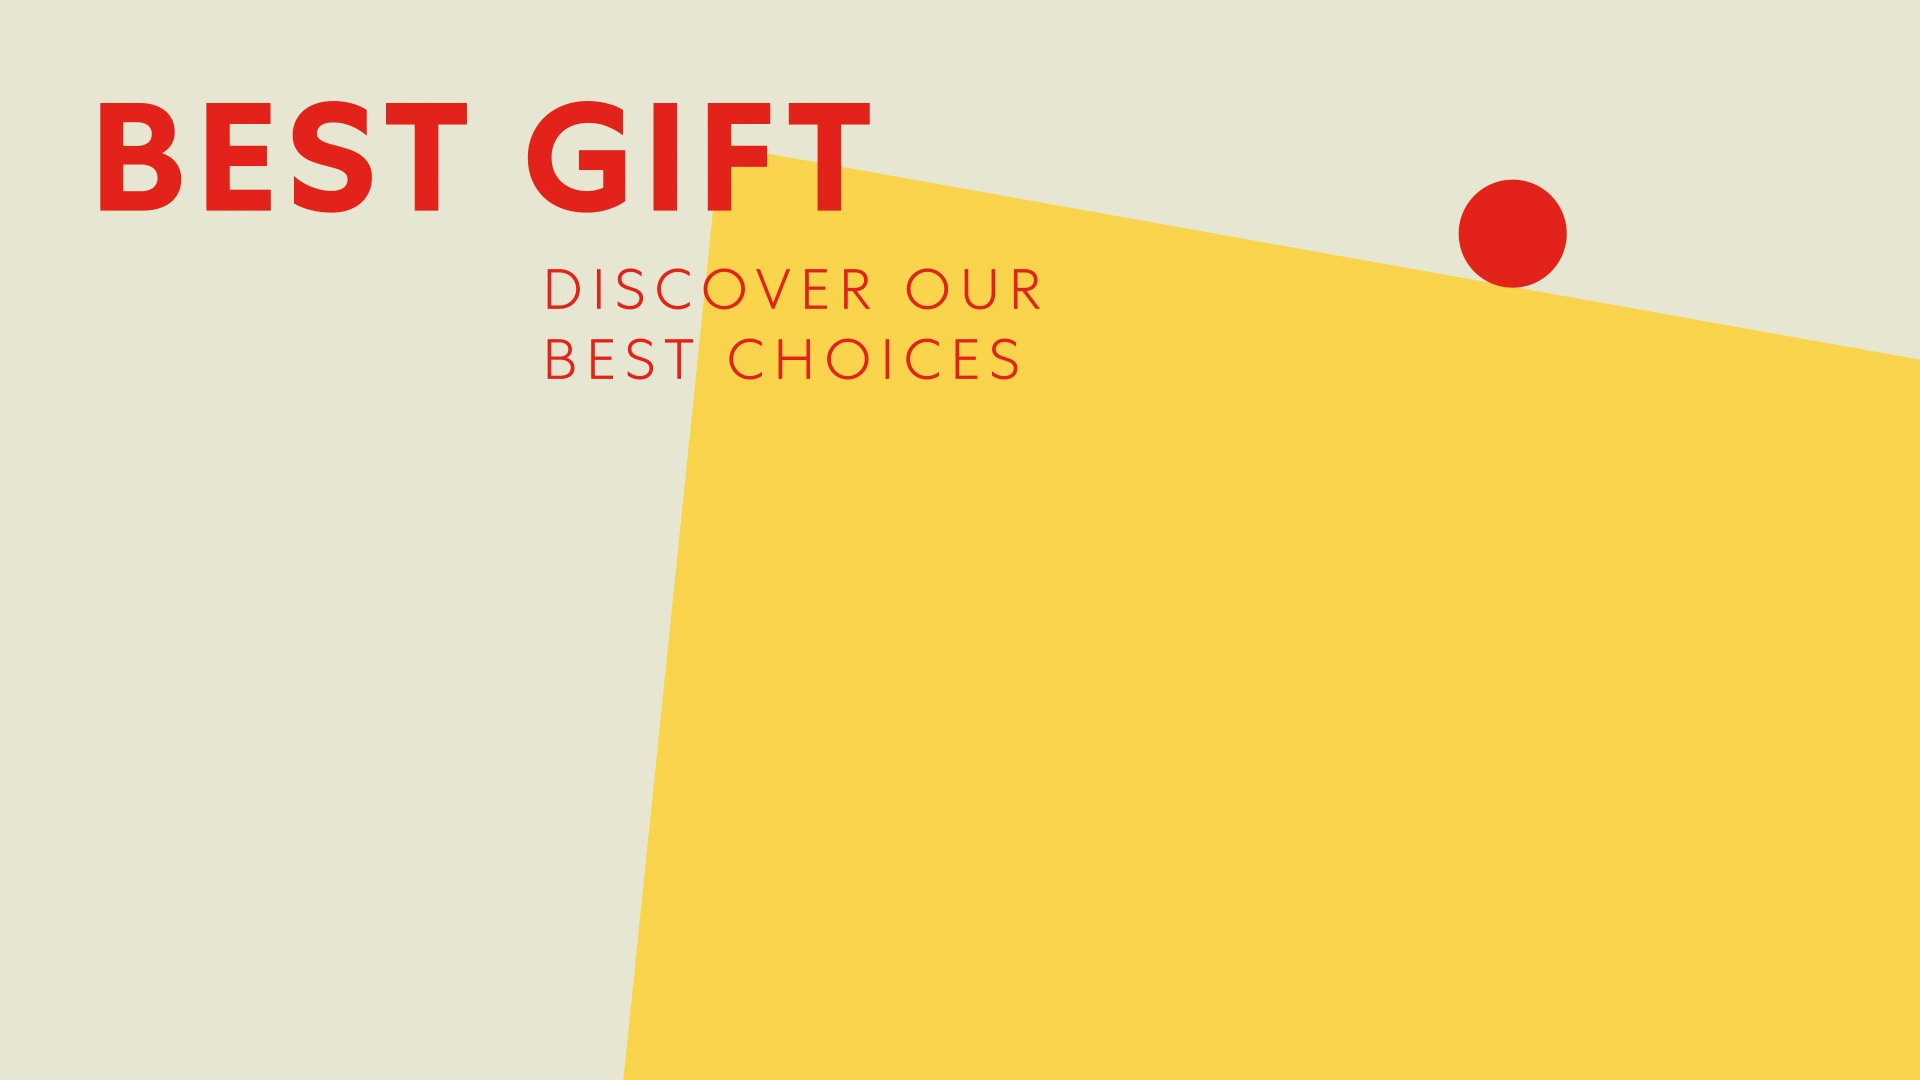 Image taken from the Zippy motion film, a visual composition with a big yellow square and a small red circle balancing each other. In the top left corner we can read "Best Gift. Discover out best choices.".